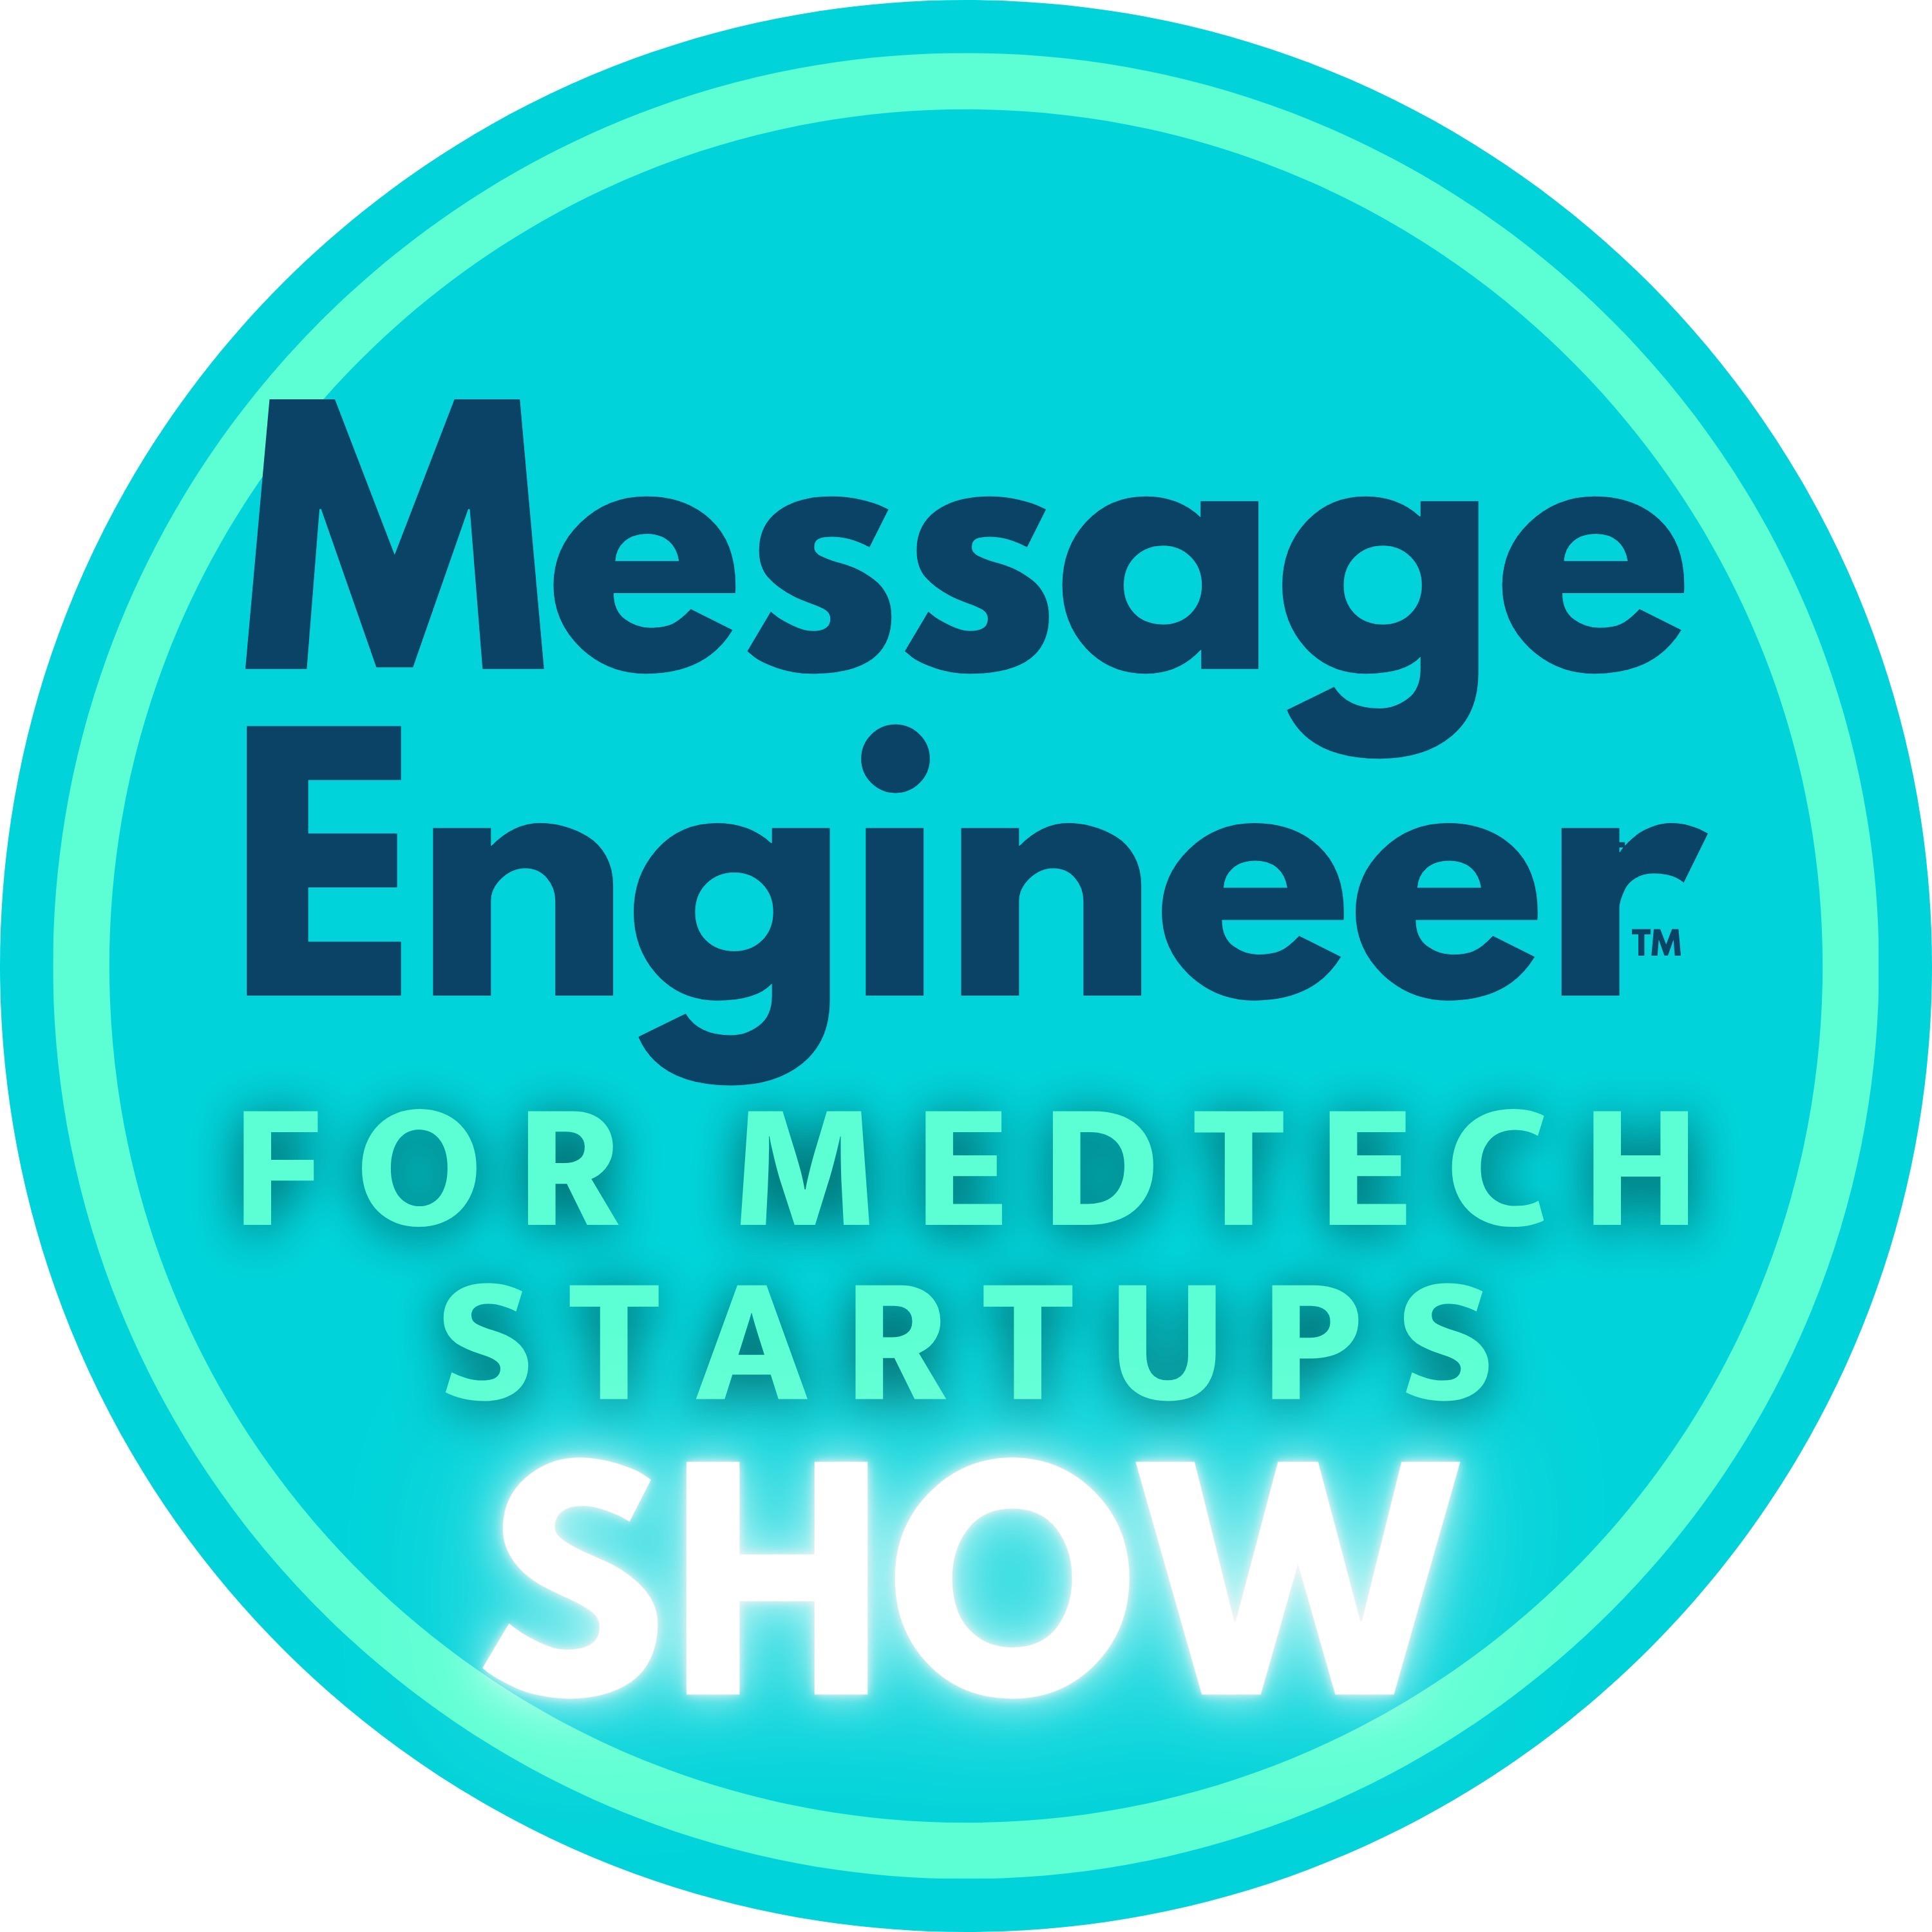 Message Engineer for the Medtech Startup Show